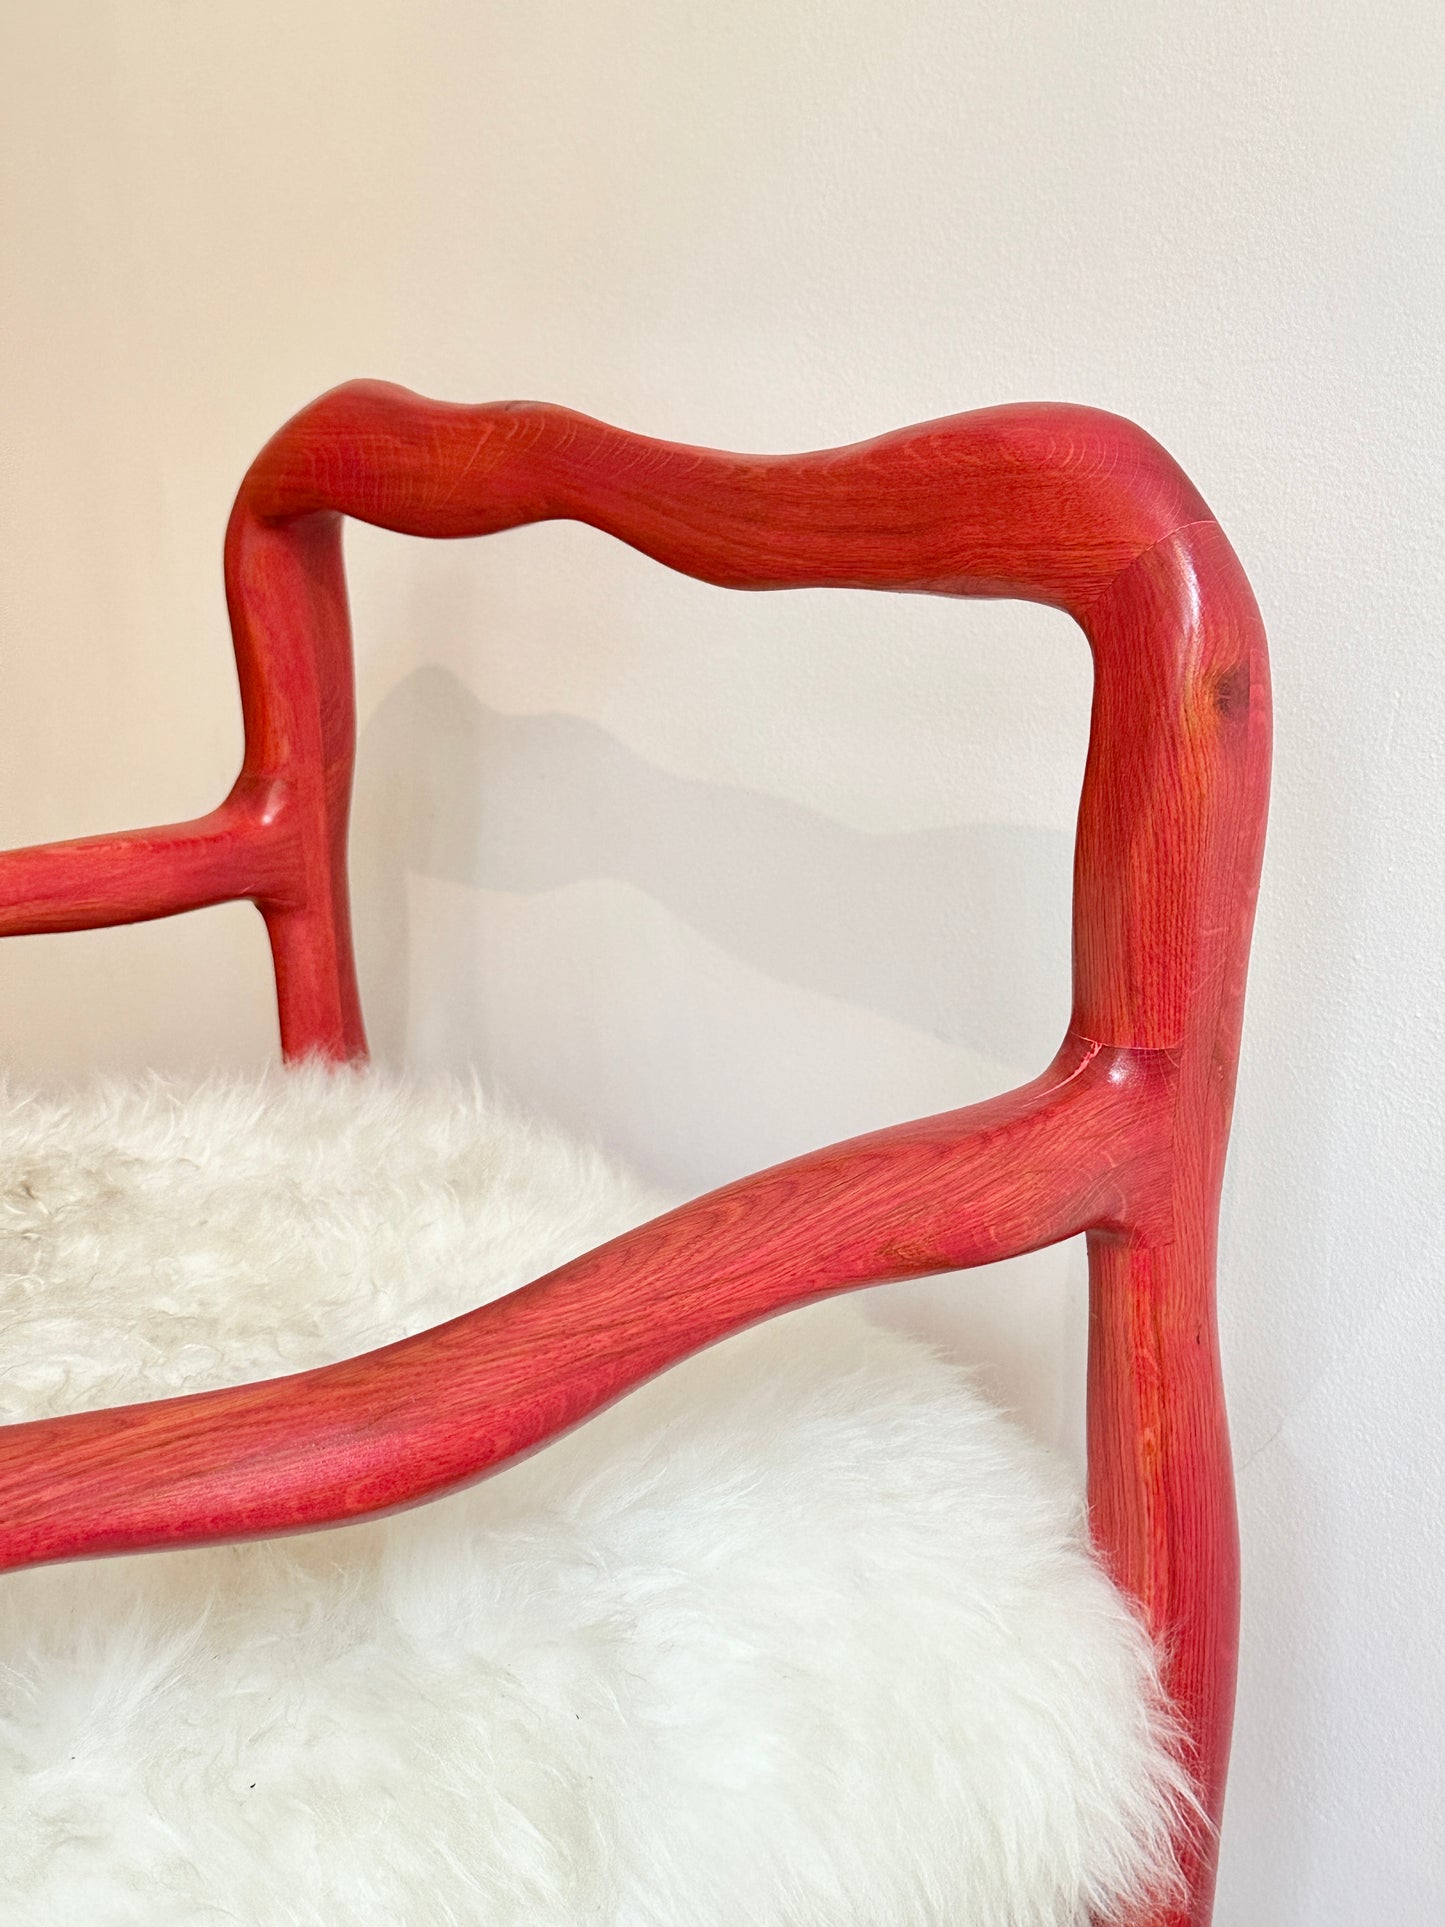 "Redpink" easy-chair by Niklas Runesson